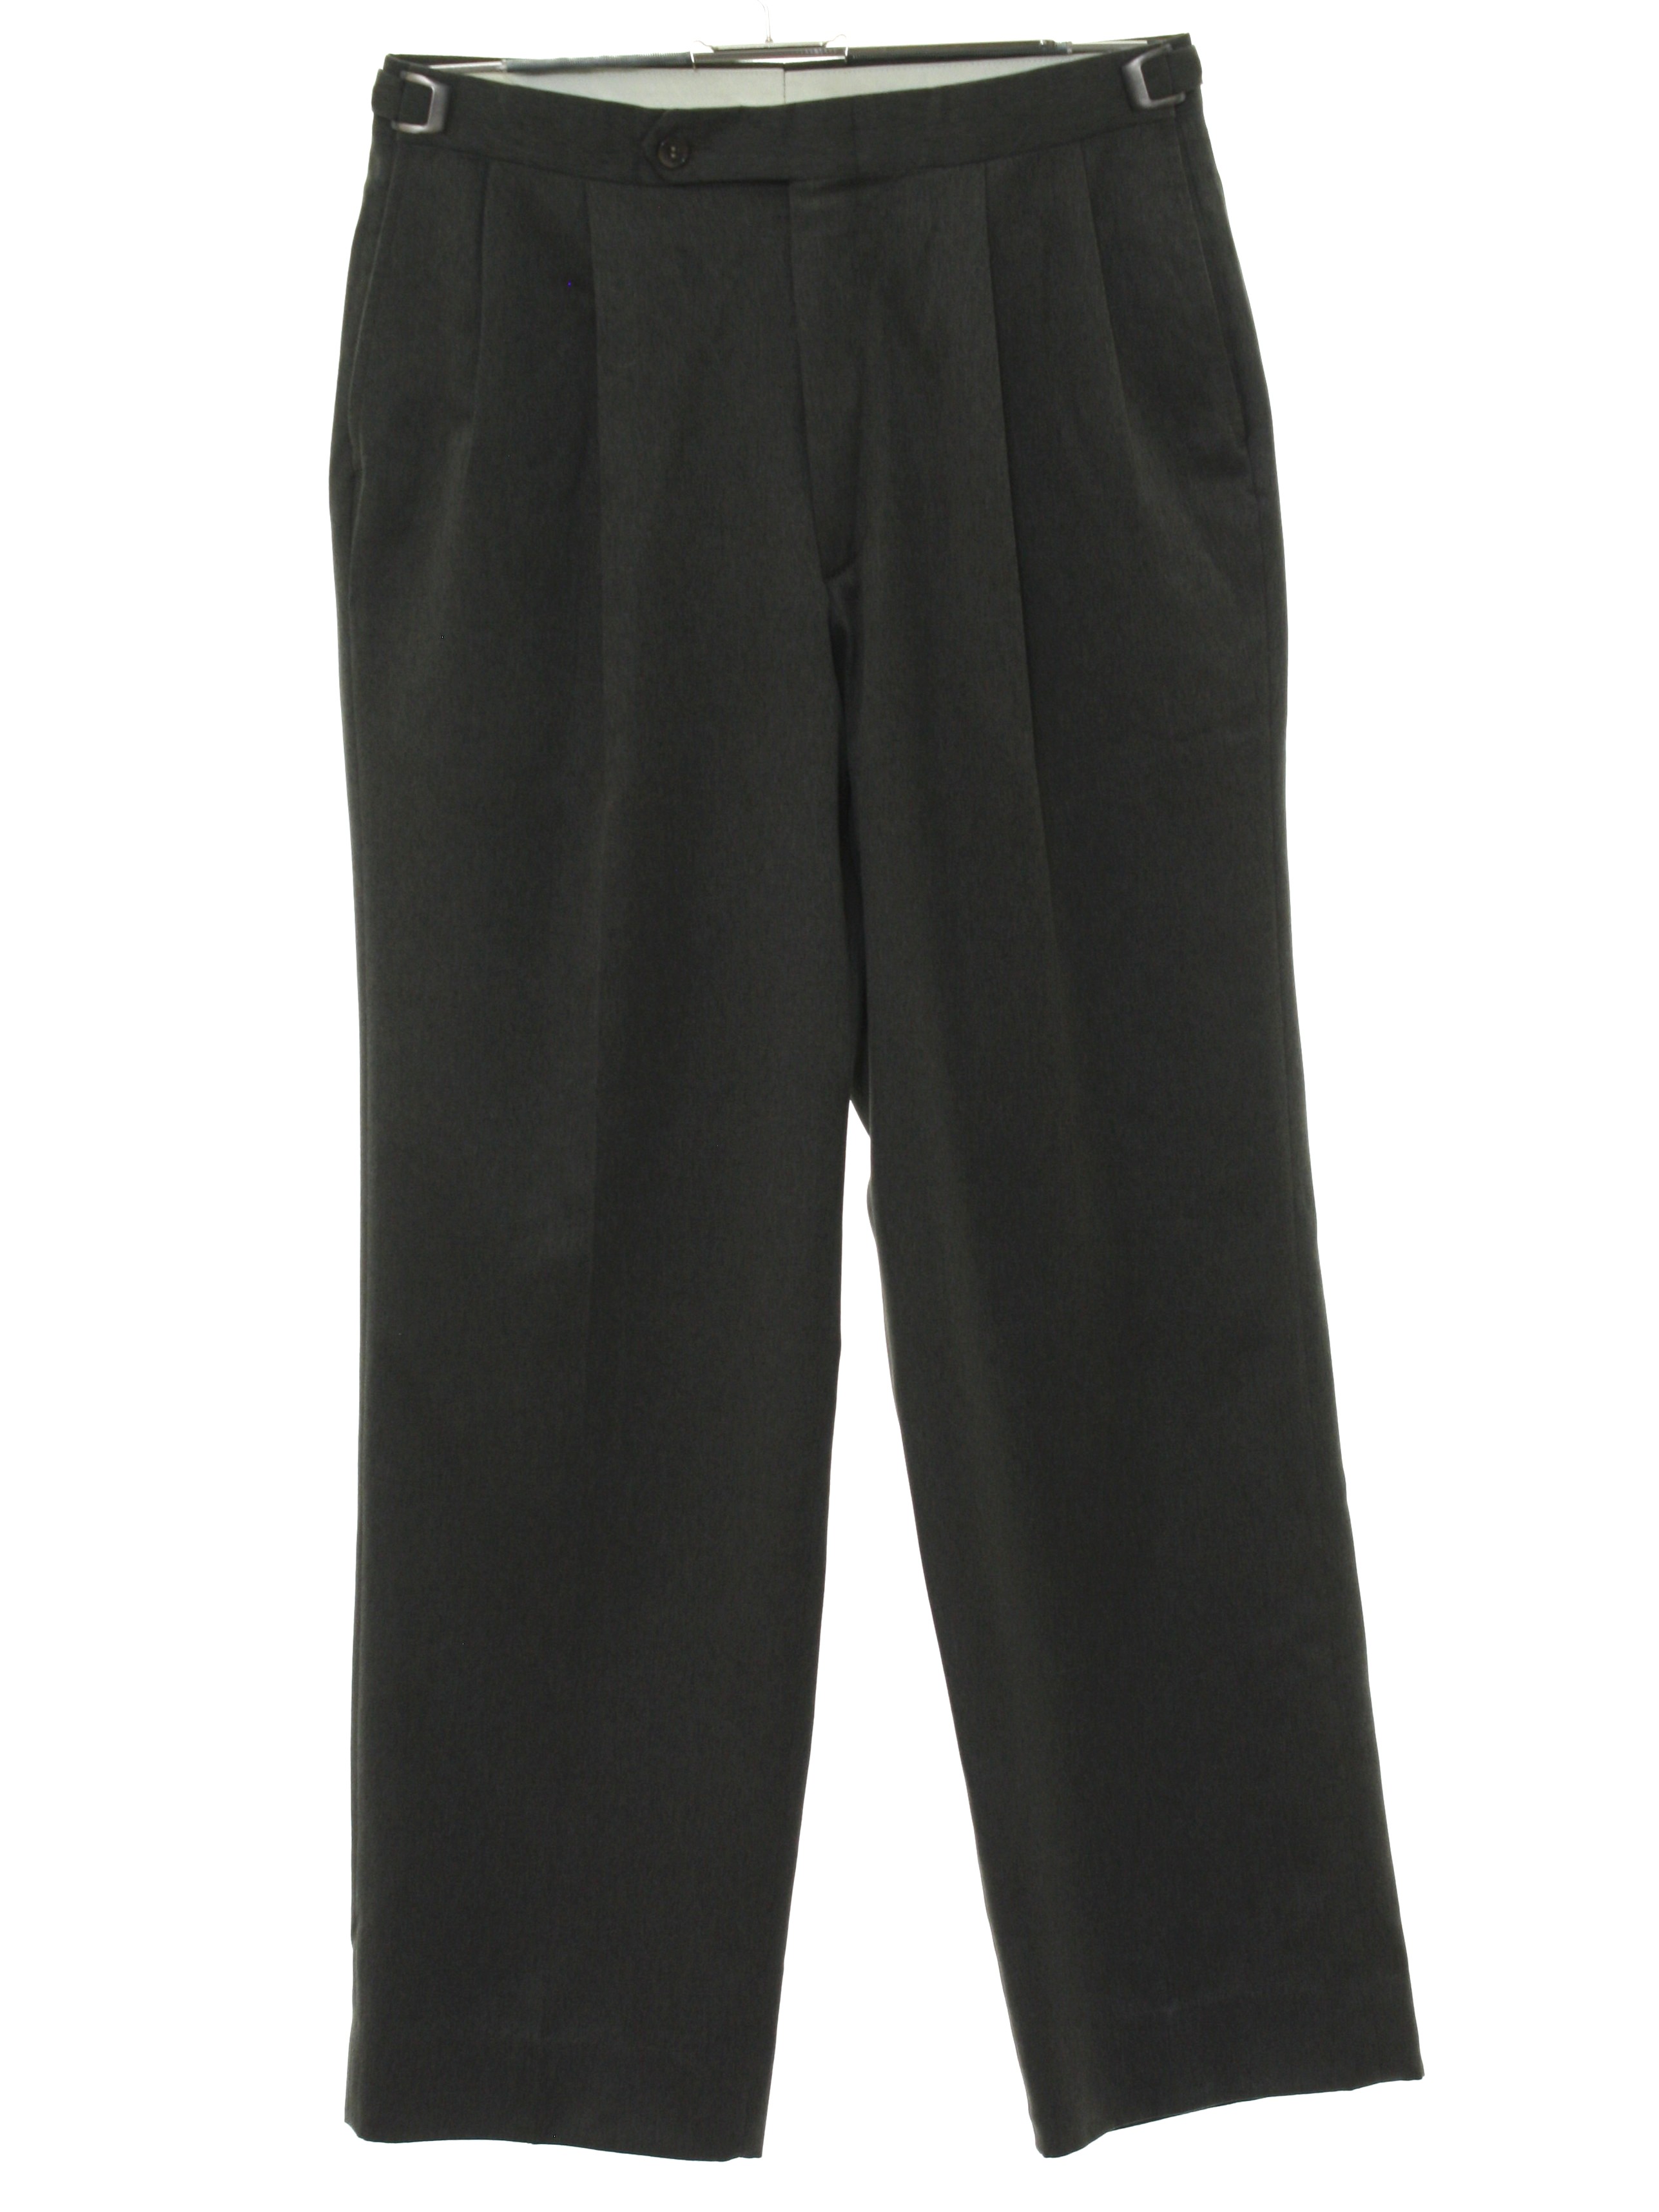 Eighties Vintage Pants: Late 80s or early 90s -Norm Thompson Always Fit ...